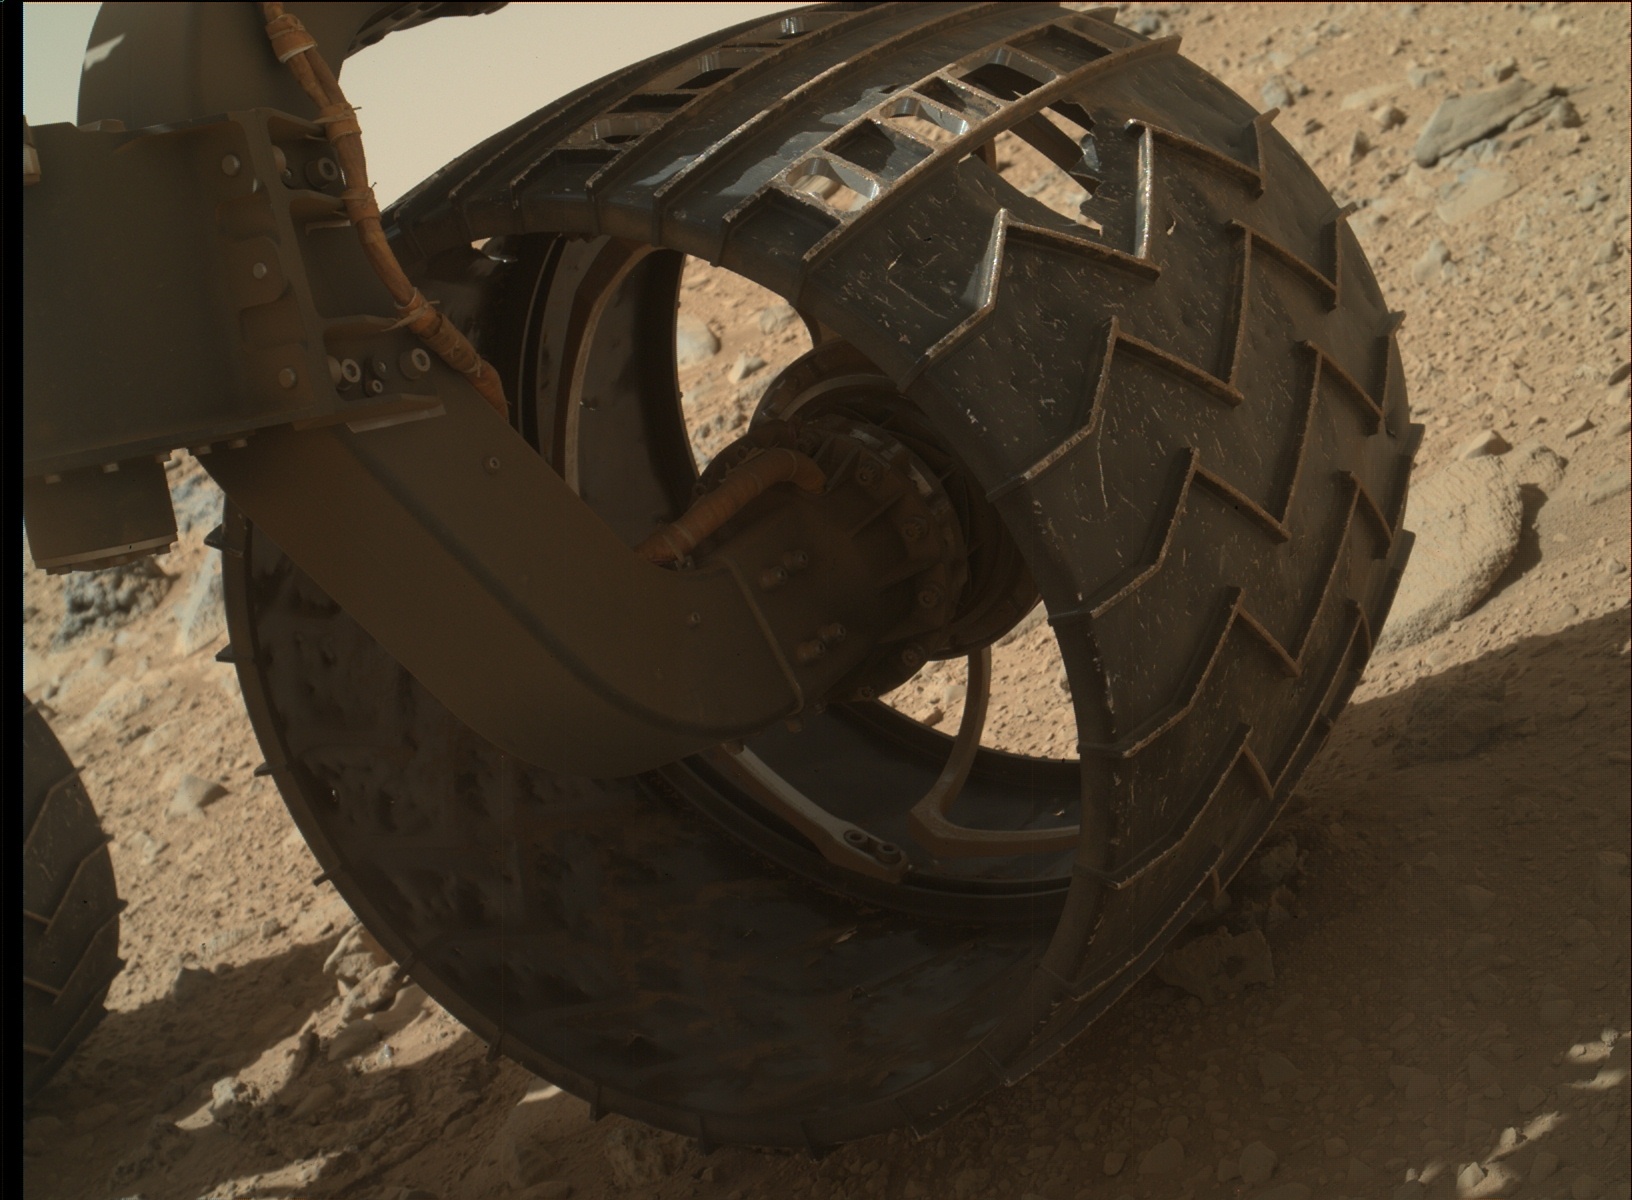 Nasa's Mars rover Curiosity acquired this image using its Mars Hand Lens Imager (MAHLI) on Sol 513